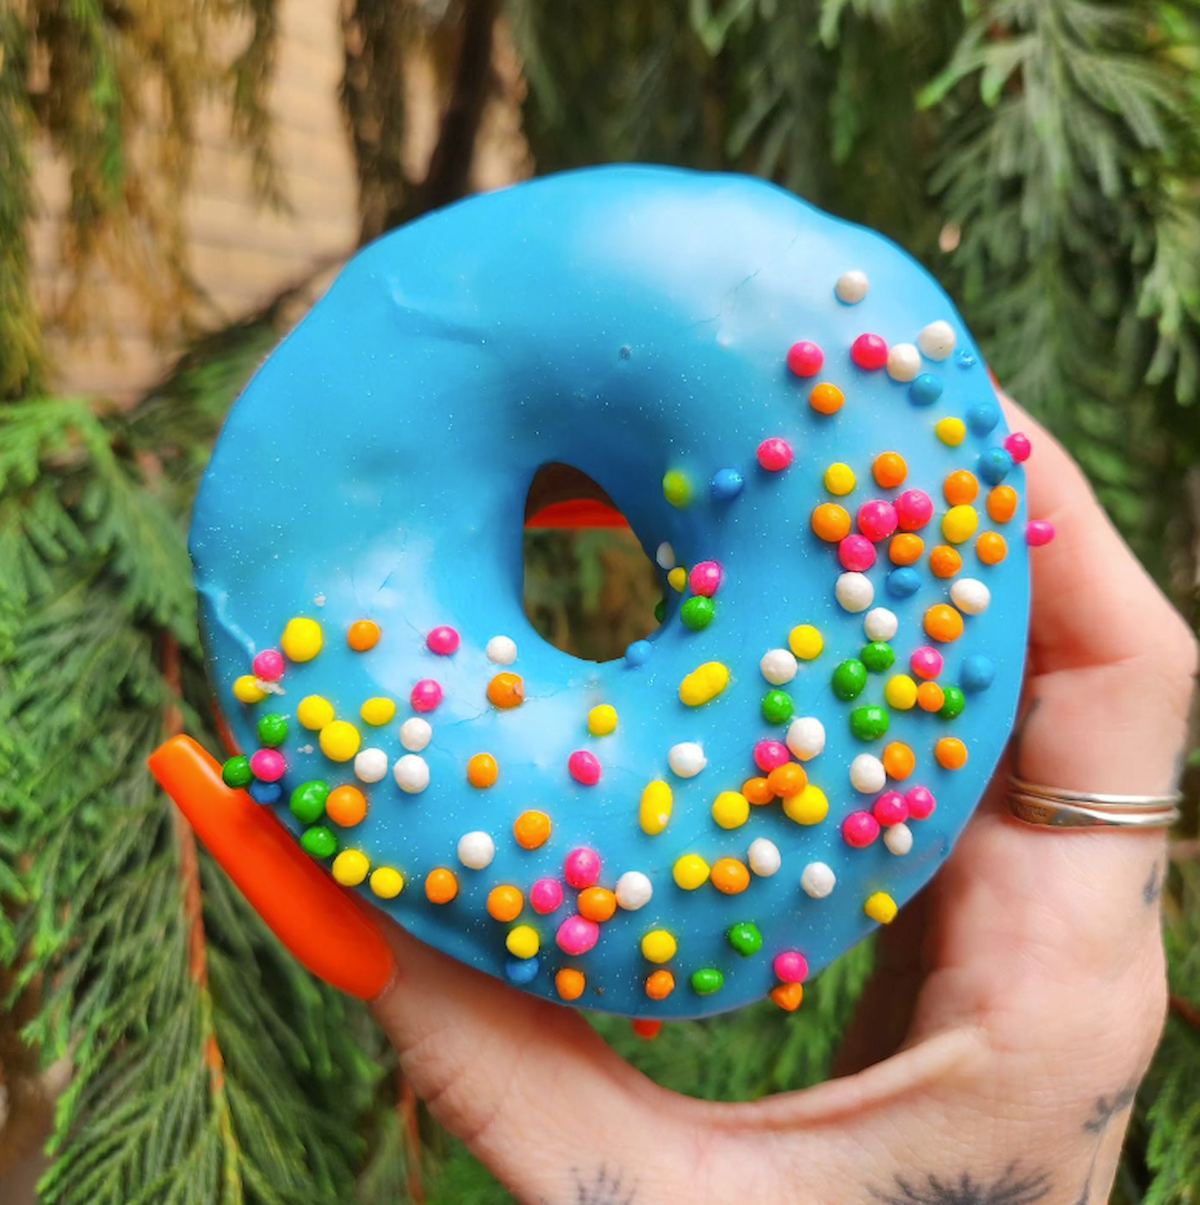 A hand holding a bubble gum flavored vegan donut.